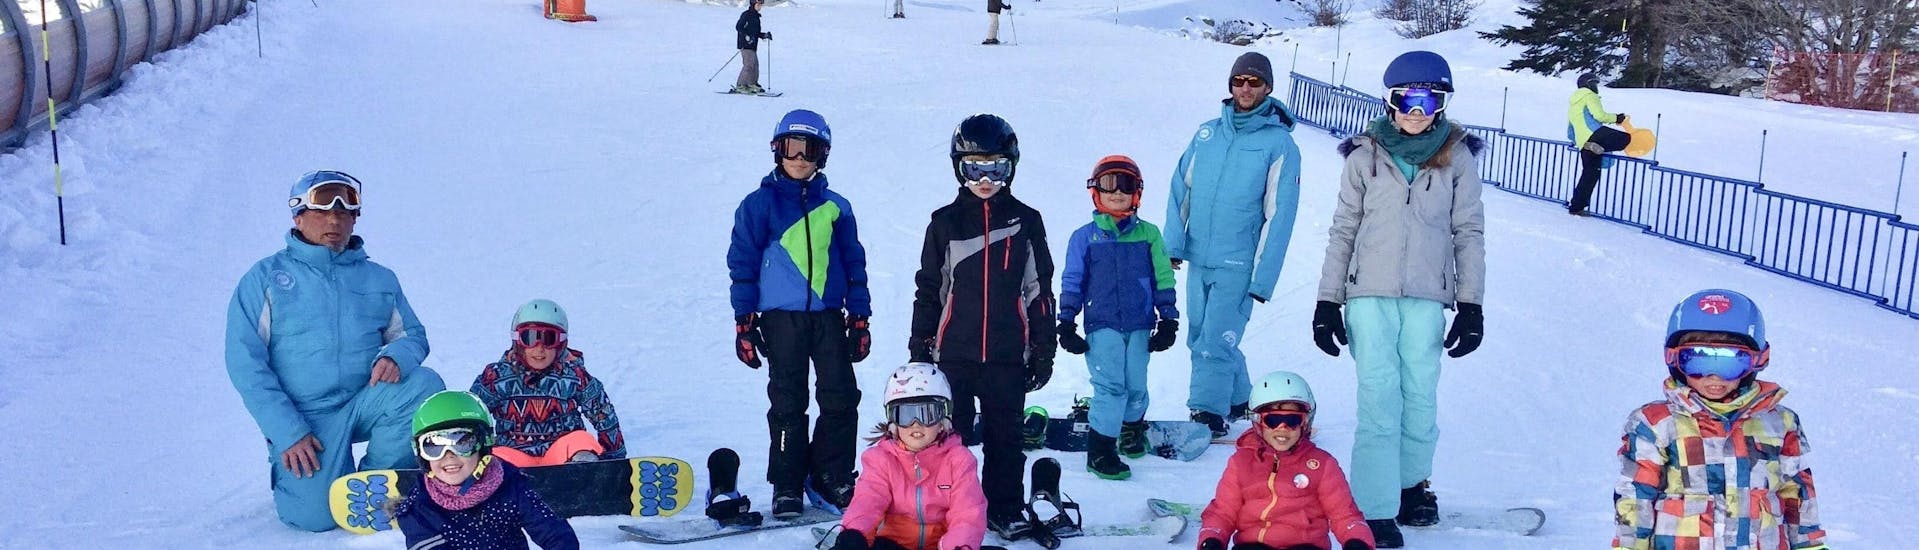 Snowboarders are sitting in the snow ready to start their Snowboarding Lessons for Kids & Adults - All Levels with the ski school ESI Ecoloski Barèges.